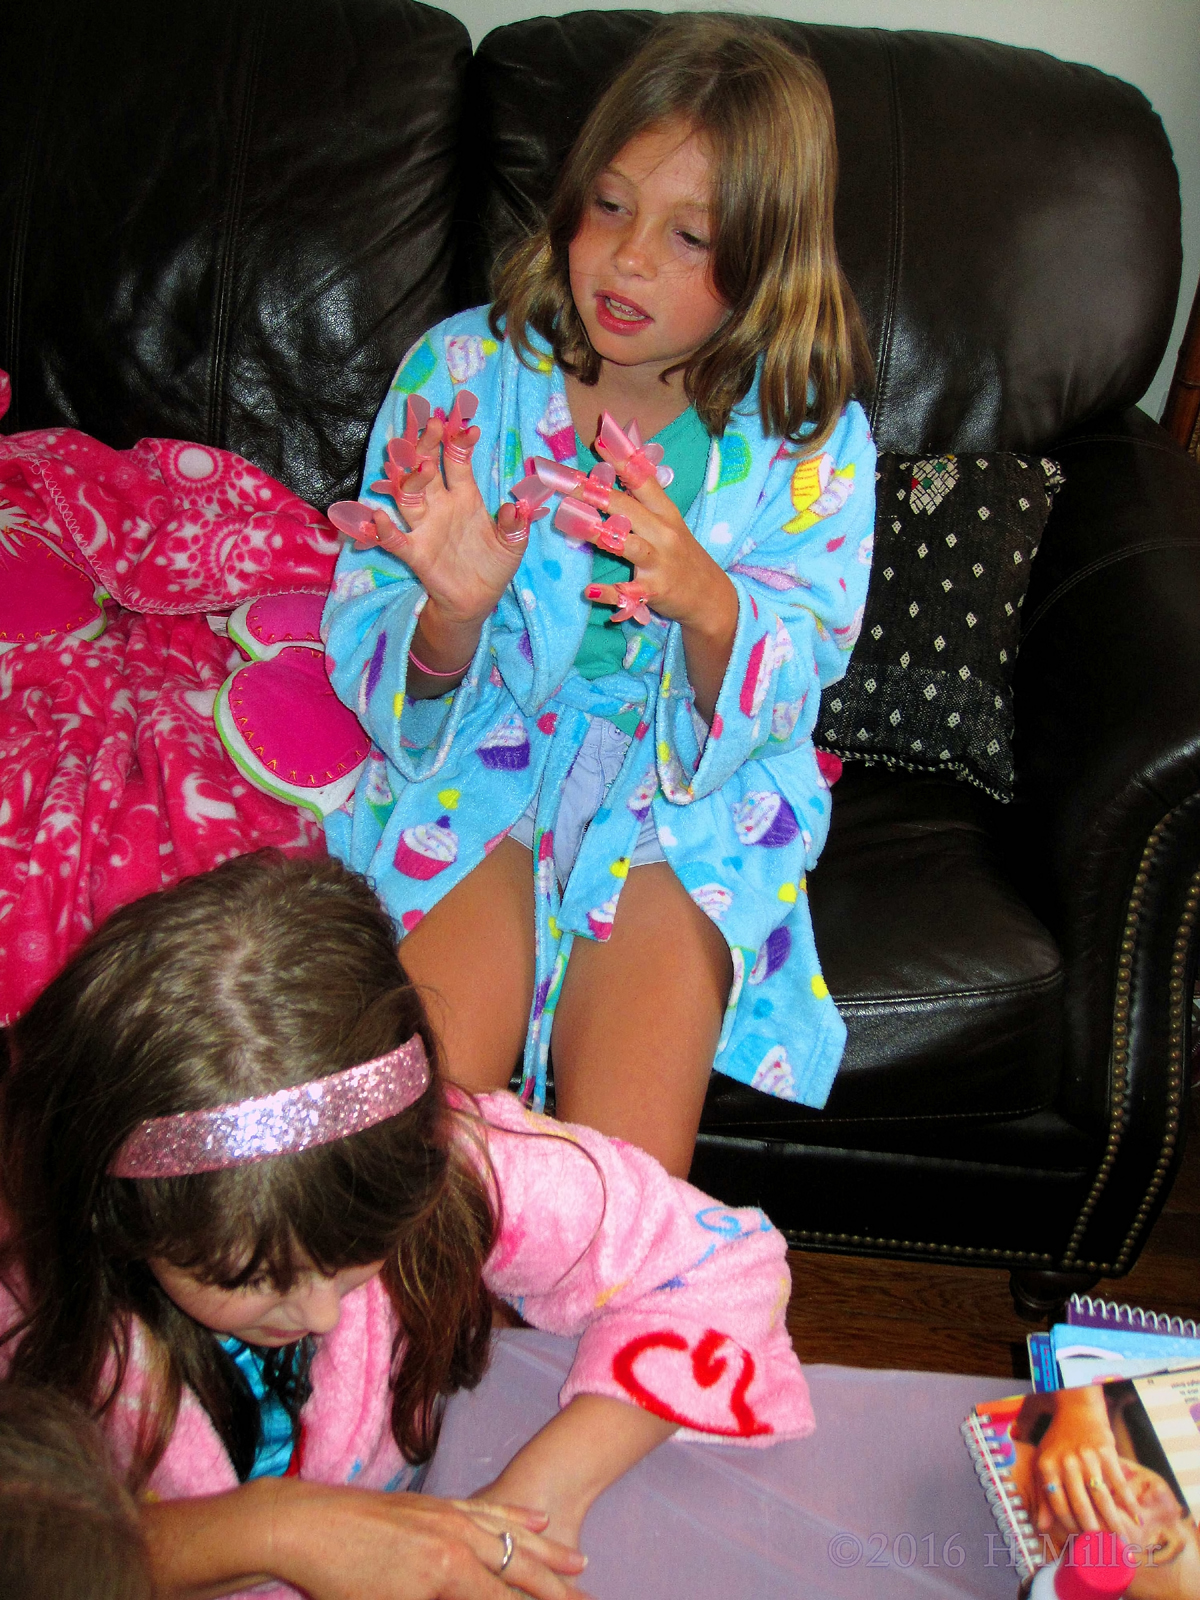 Hanging Out On The Couch With Her Manicure Protectors 